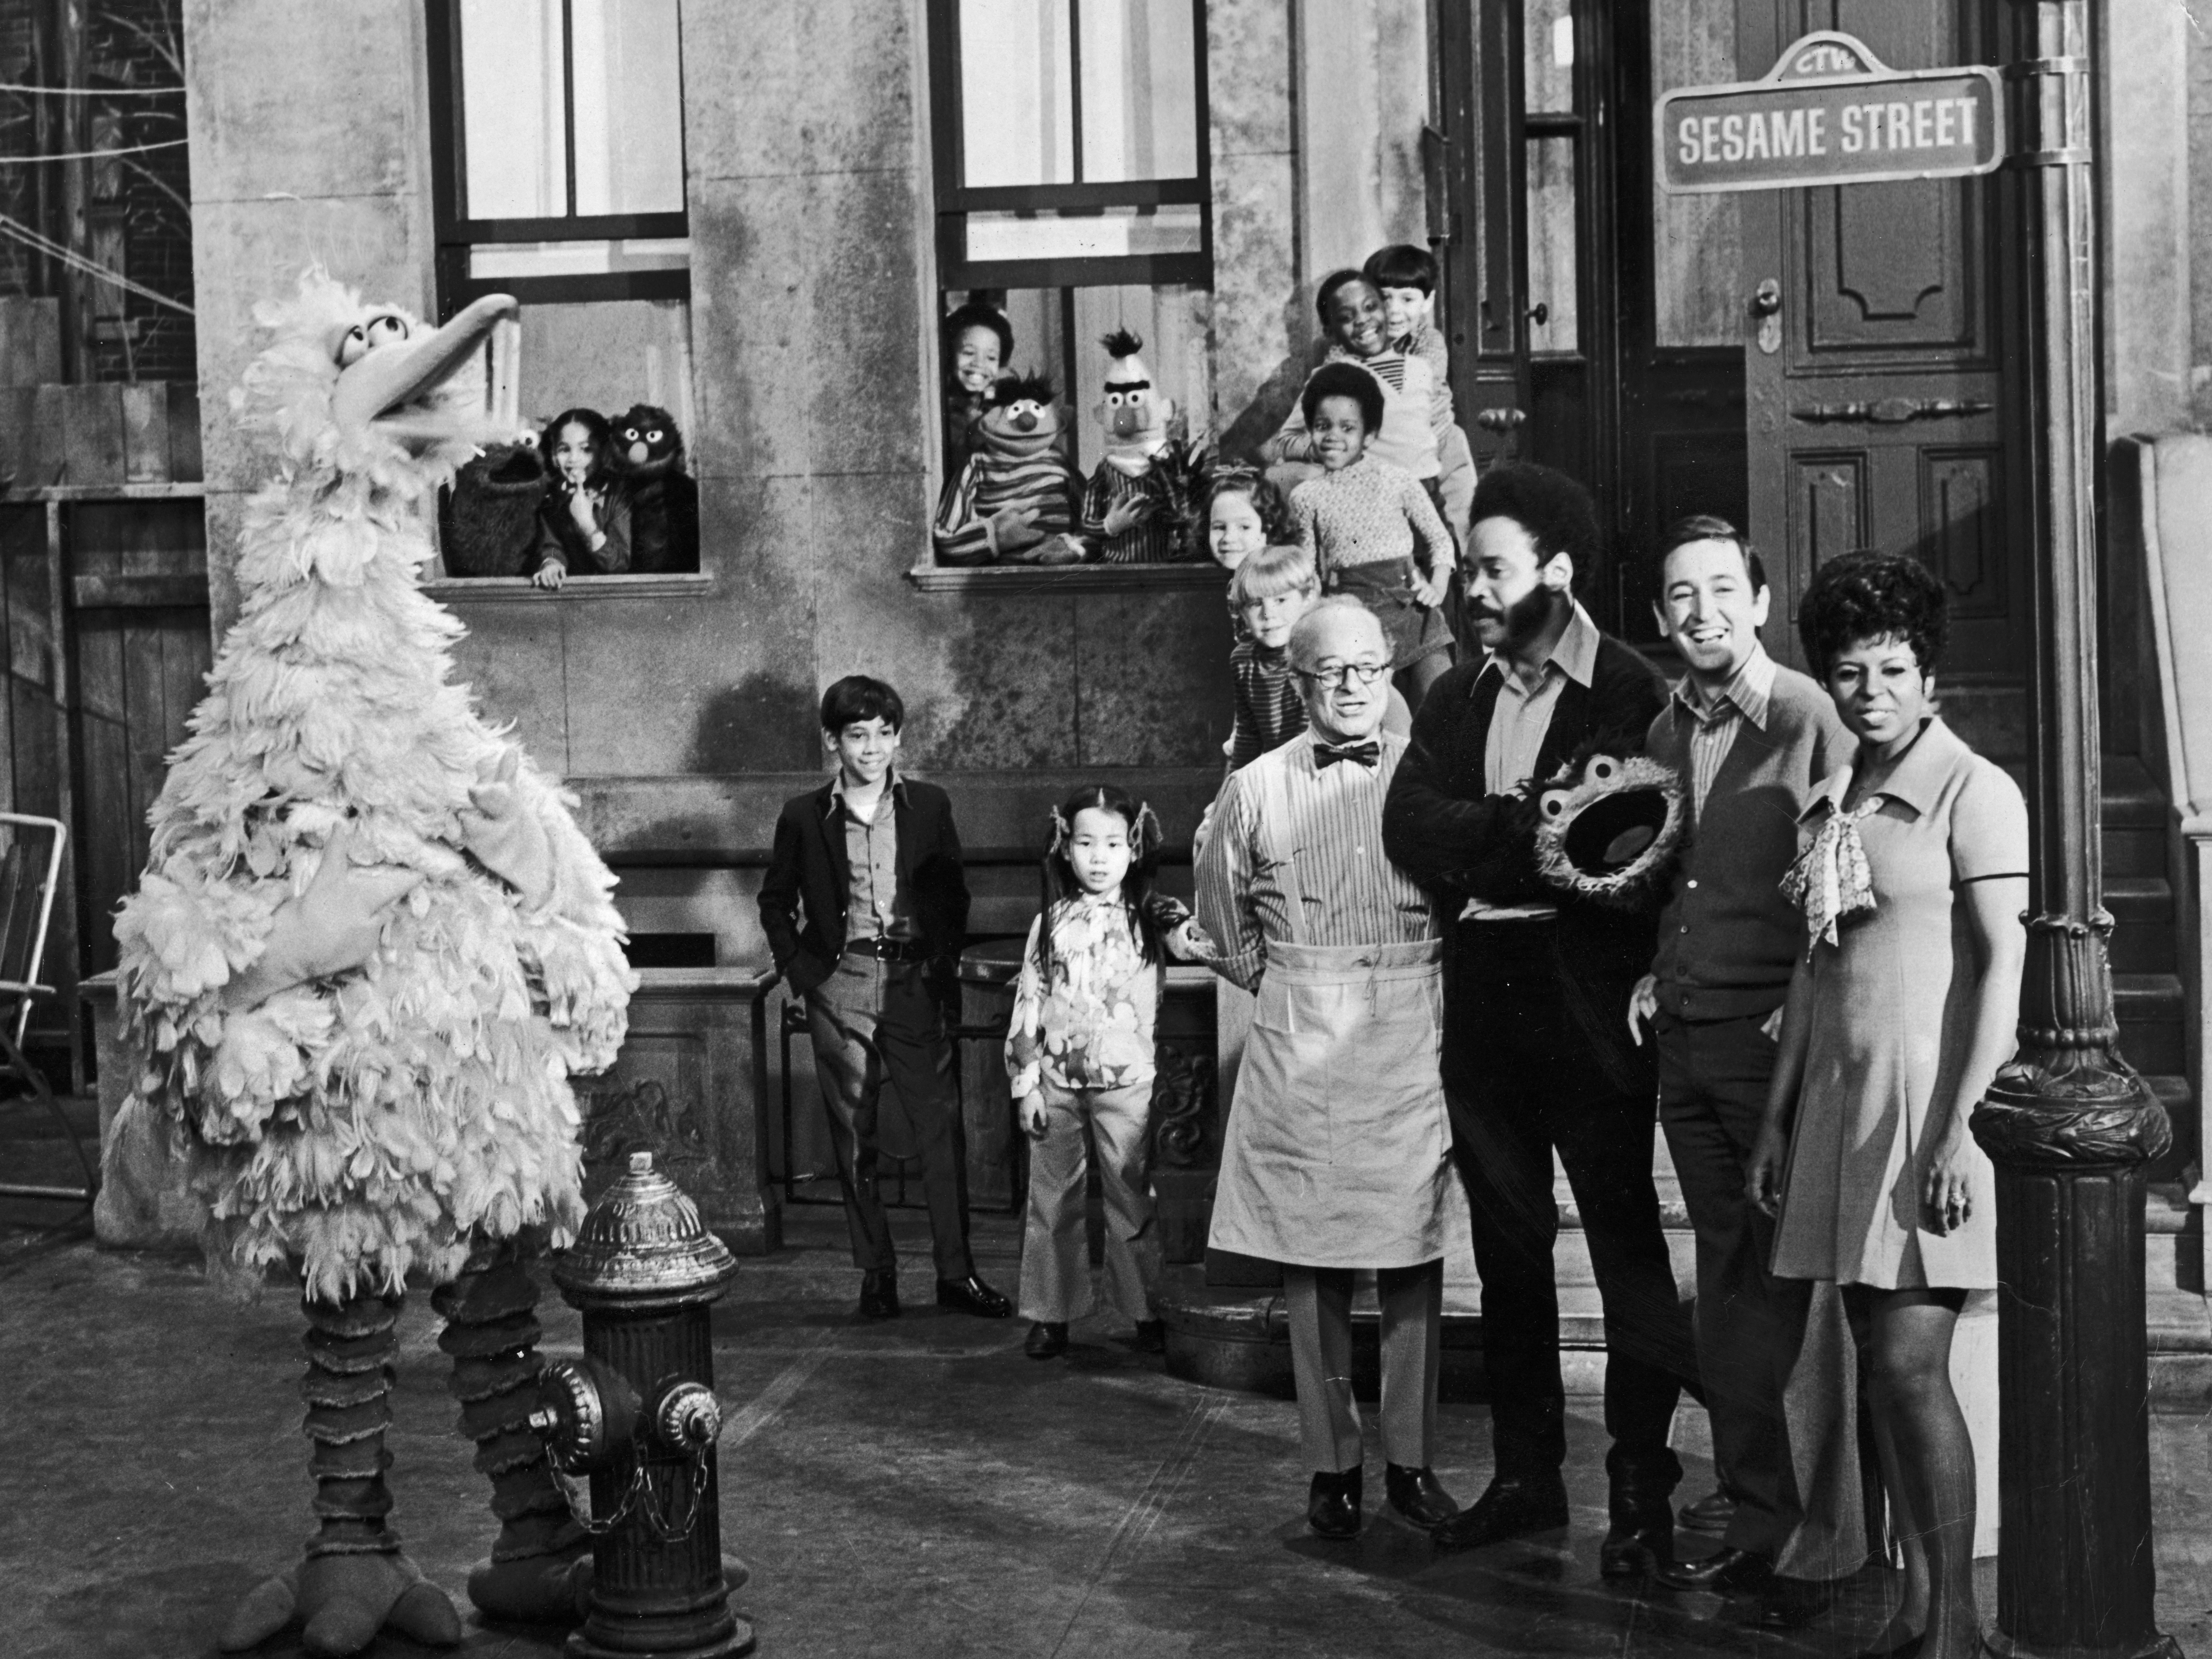 Cast members of the television show, Sesame Street on the set in 1969, the year the show debuted. Hulton Archive/Getty Images